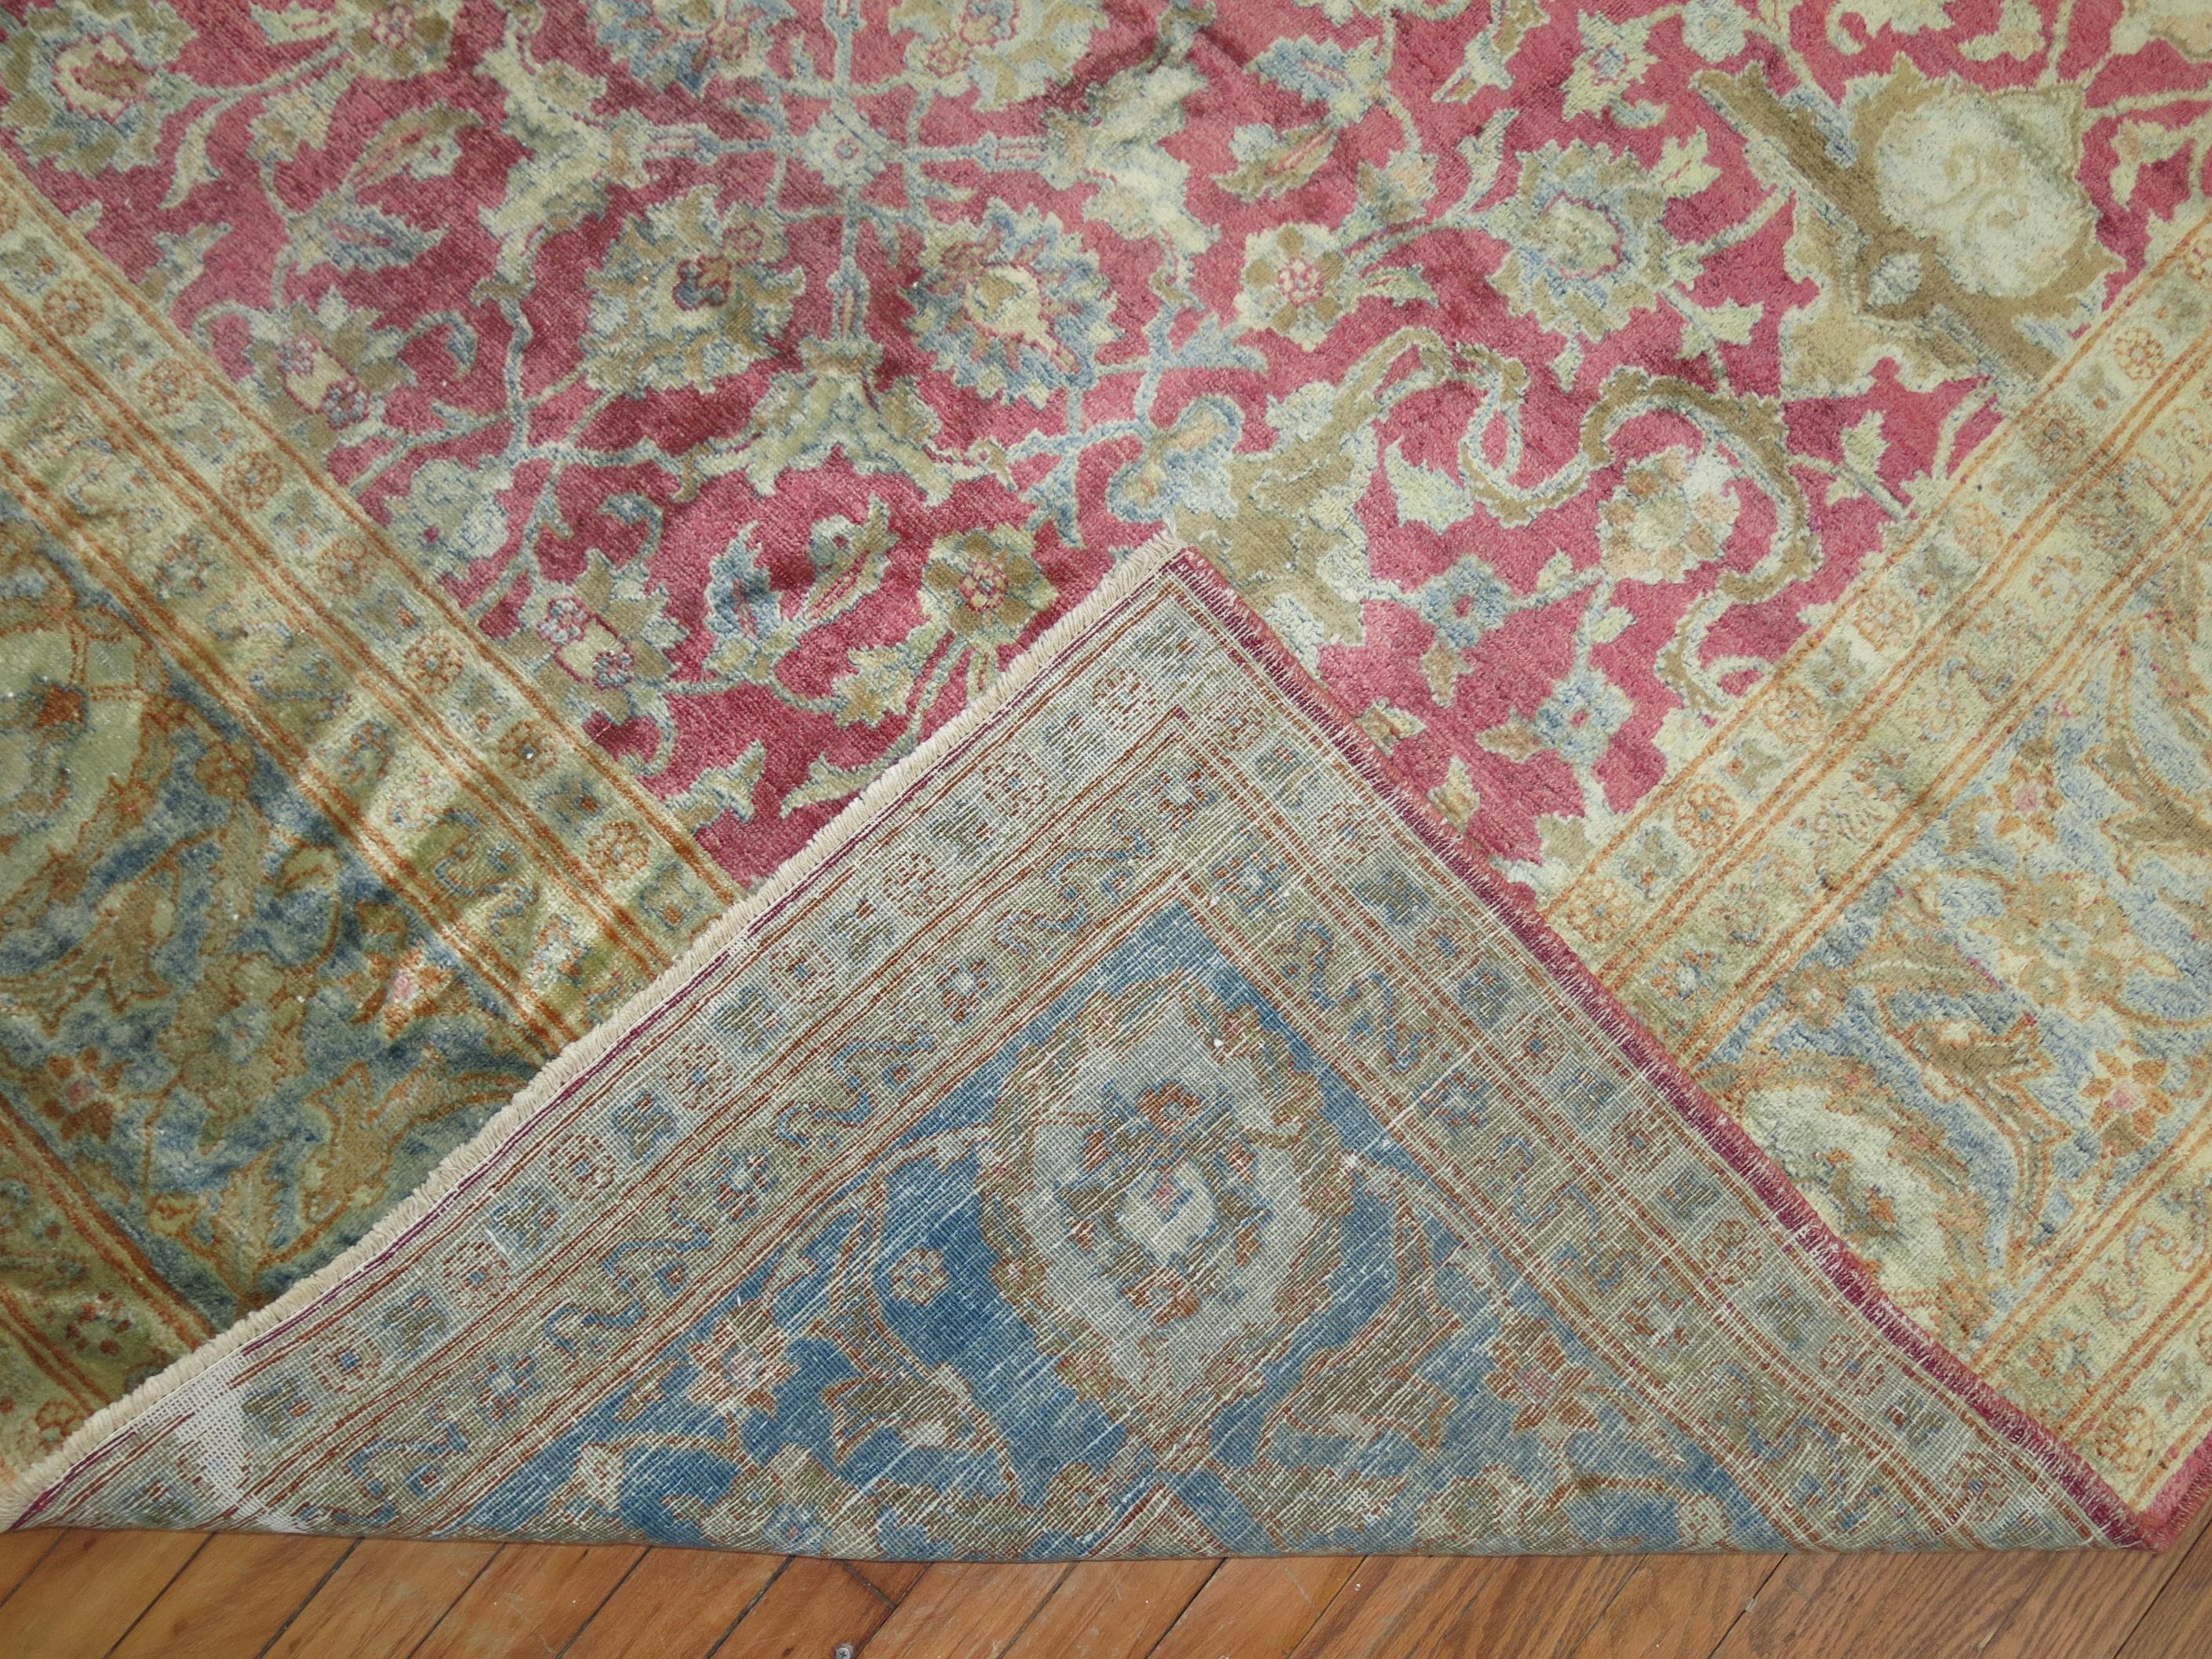 Raspberry Icy Blue Oversize Persian Tabriz Rug, Early 20th Century For Sale 2